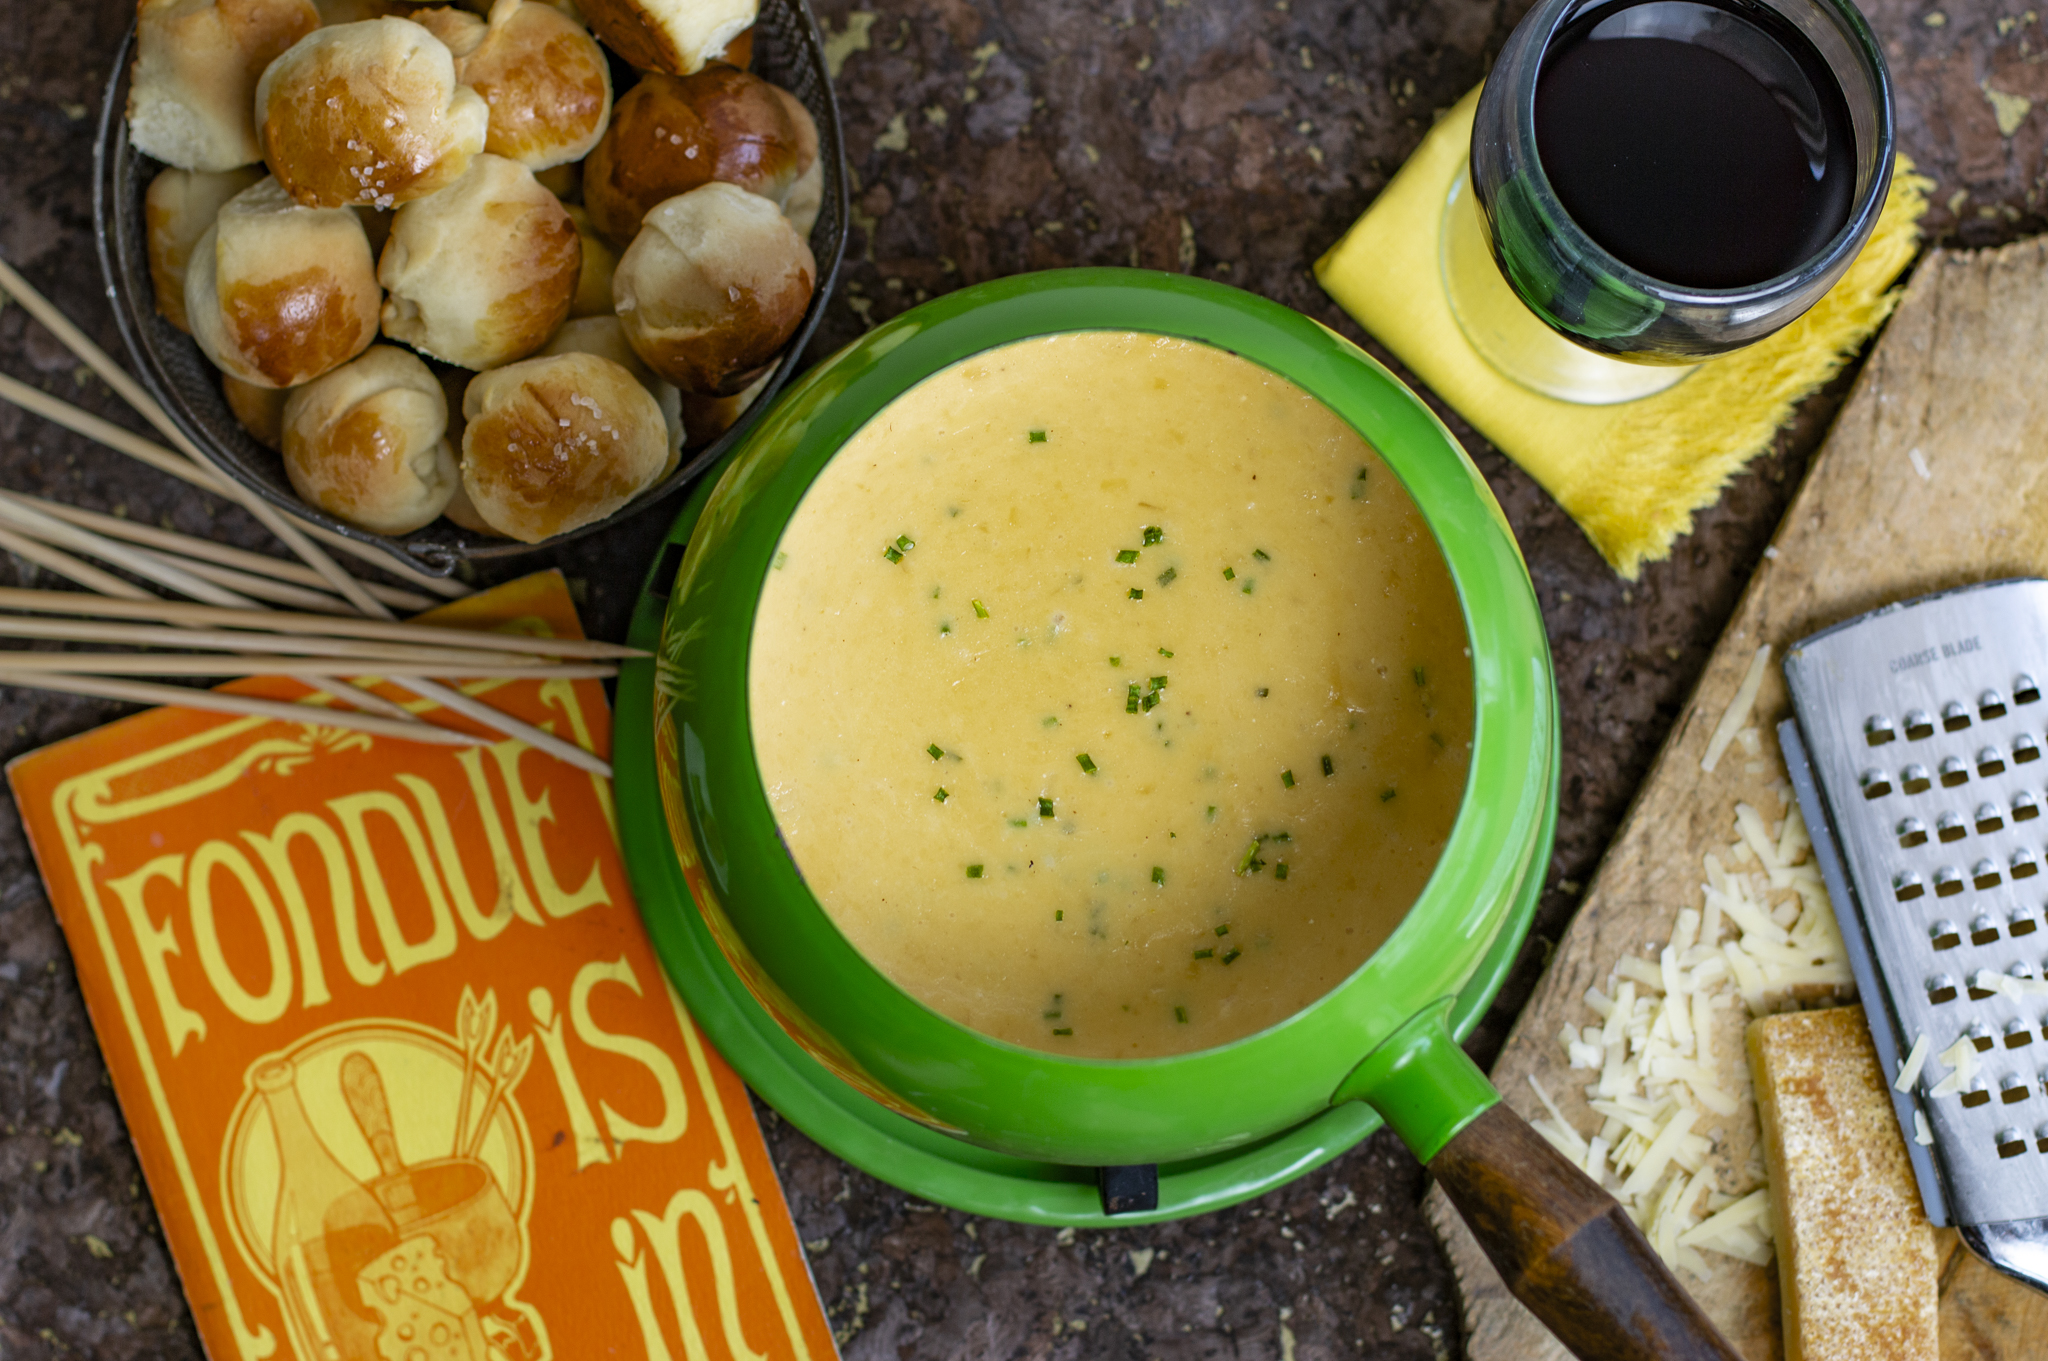 Swiss fondue done right with the addition of garlic and chives. Serve with my amazing Mini Dinner Rolls with Flaky Salt!